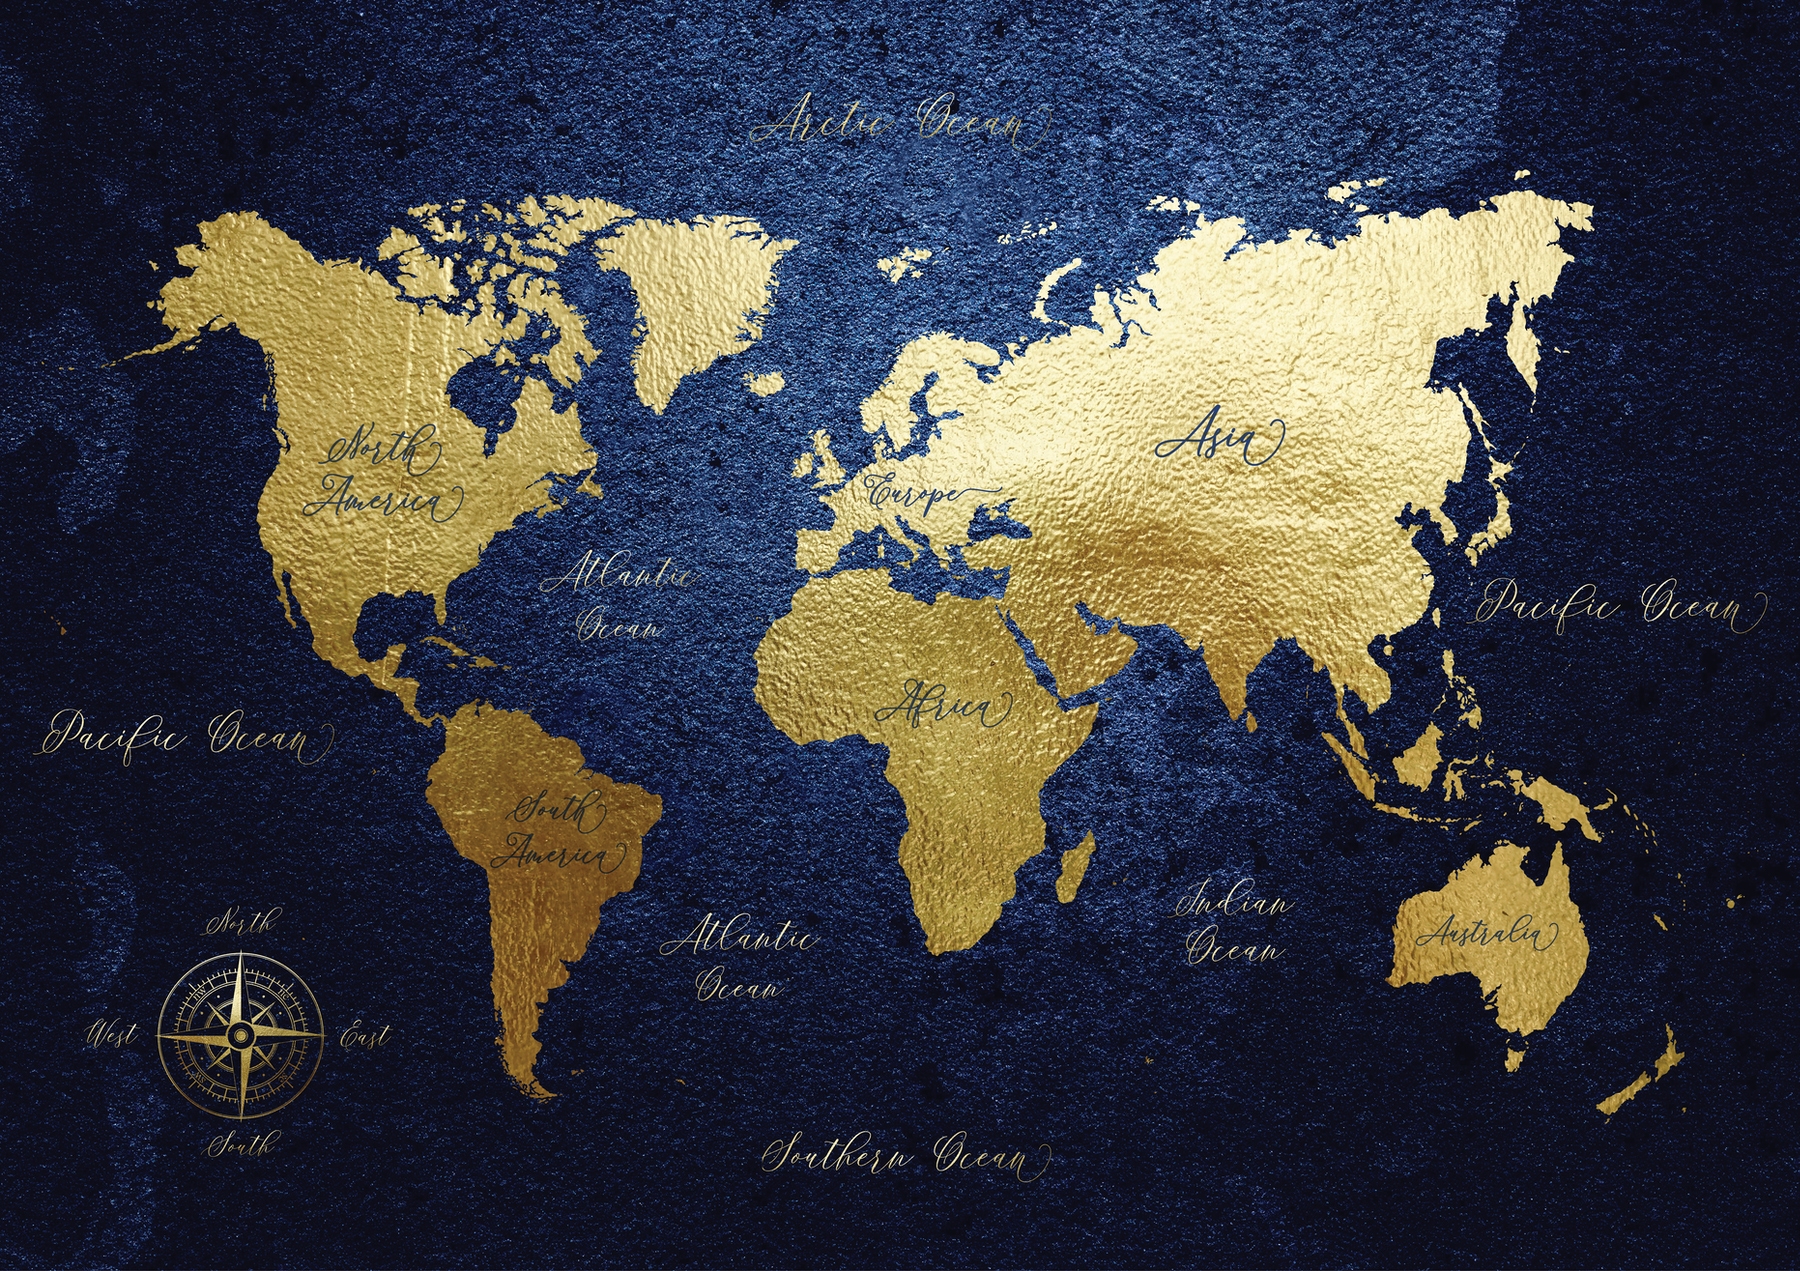 Navy Blue and Gold World Map wallpaper - Happywall